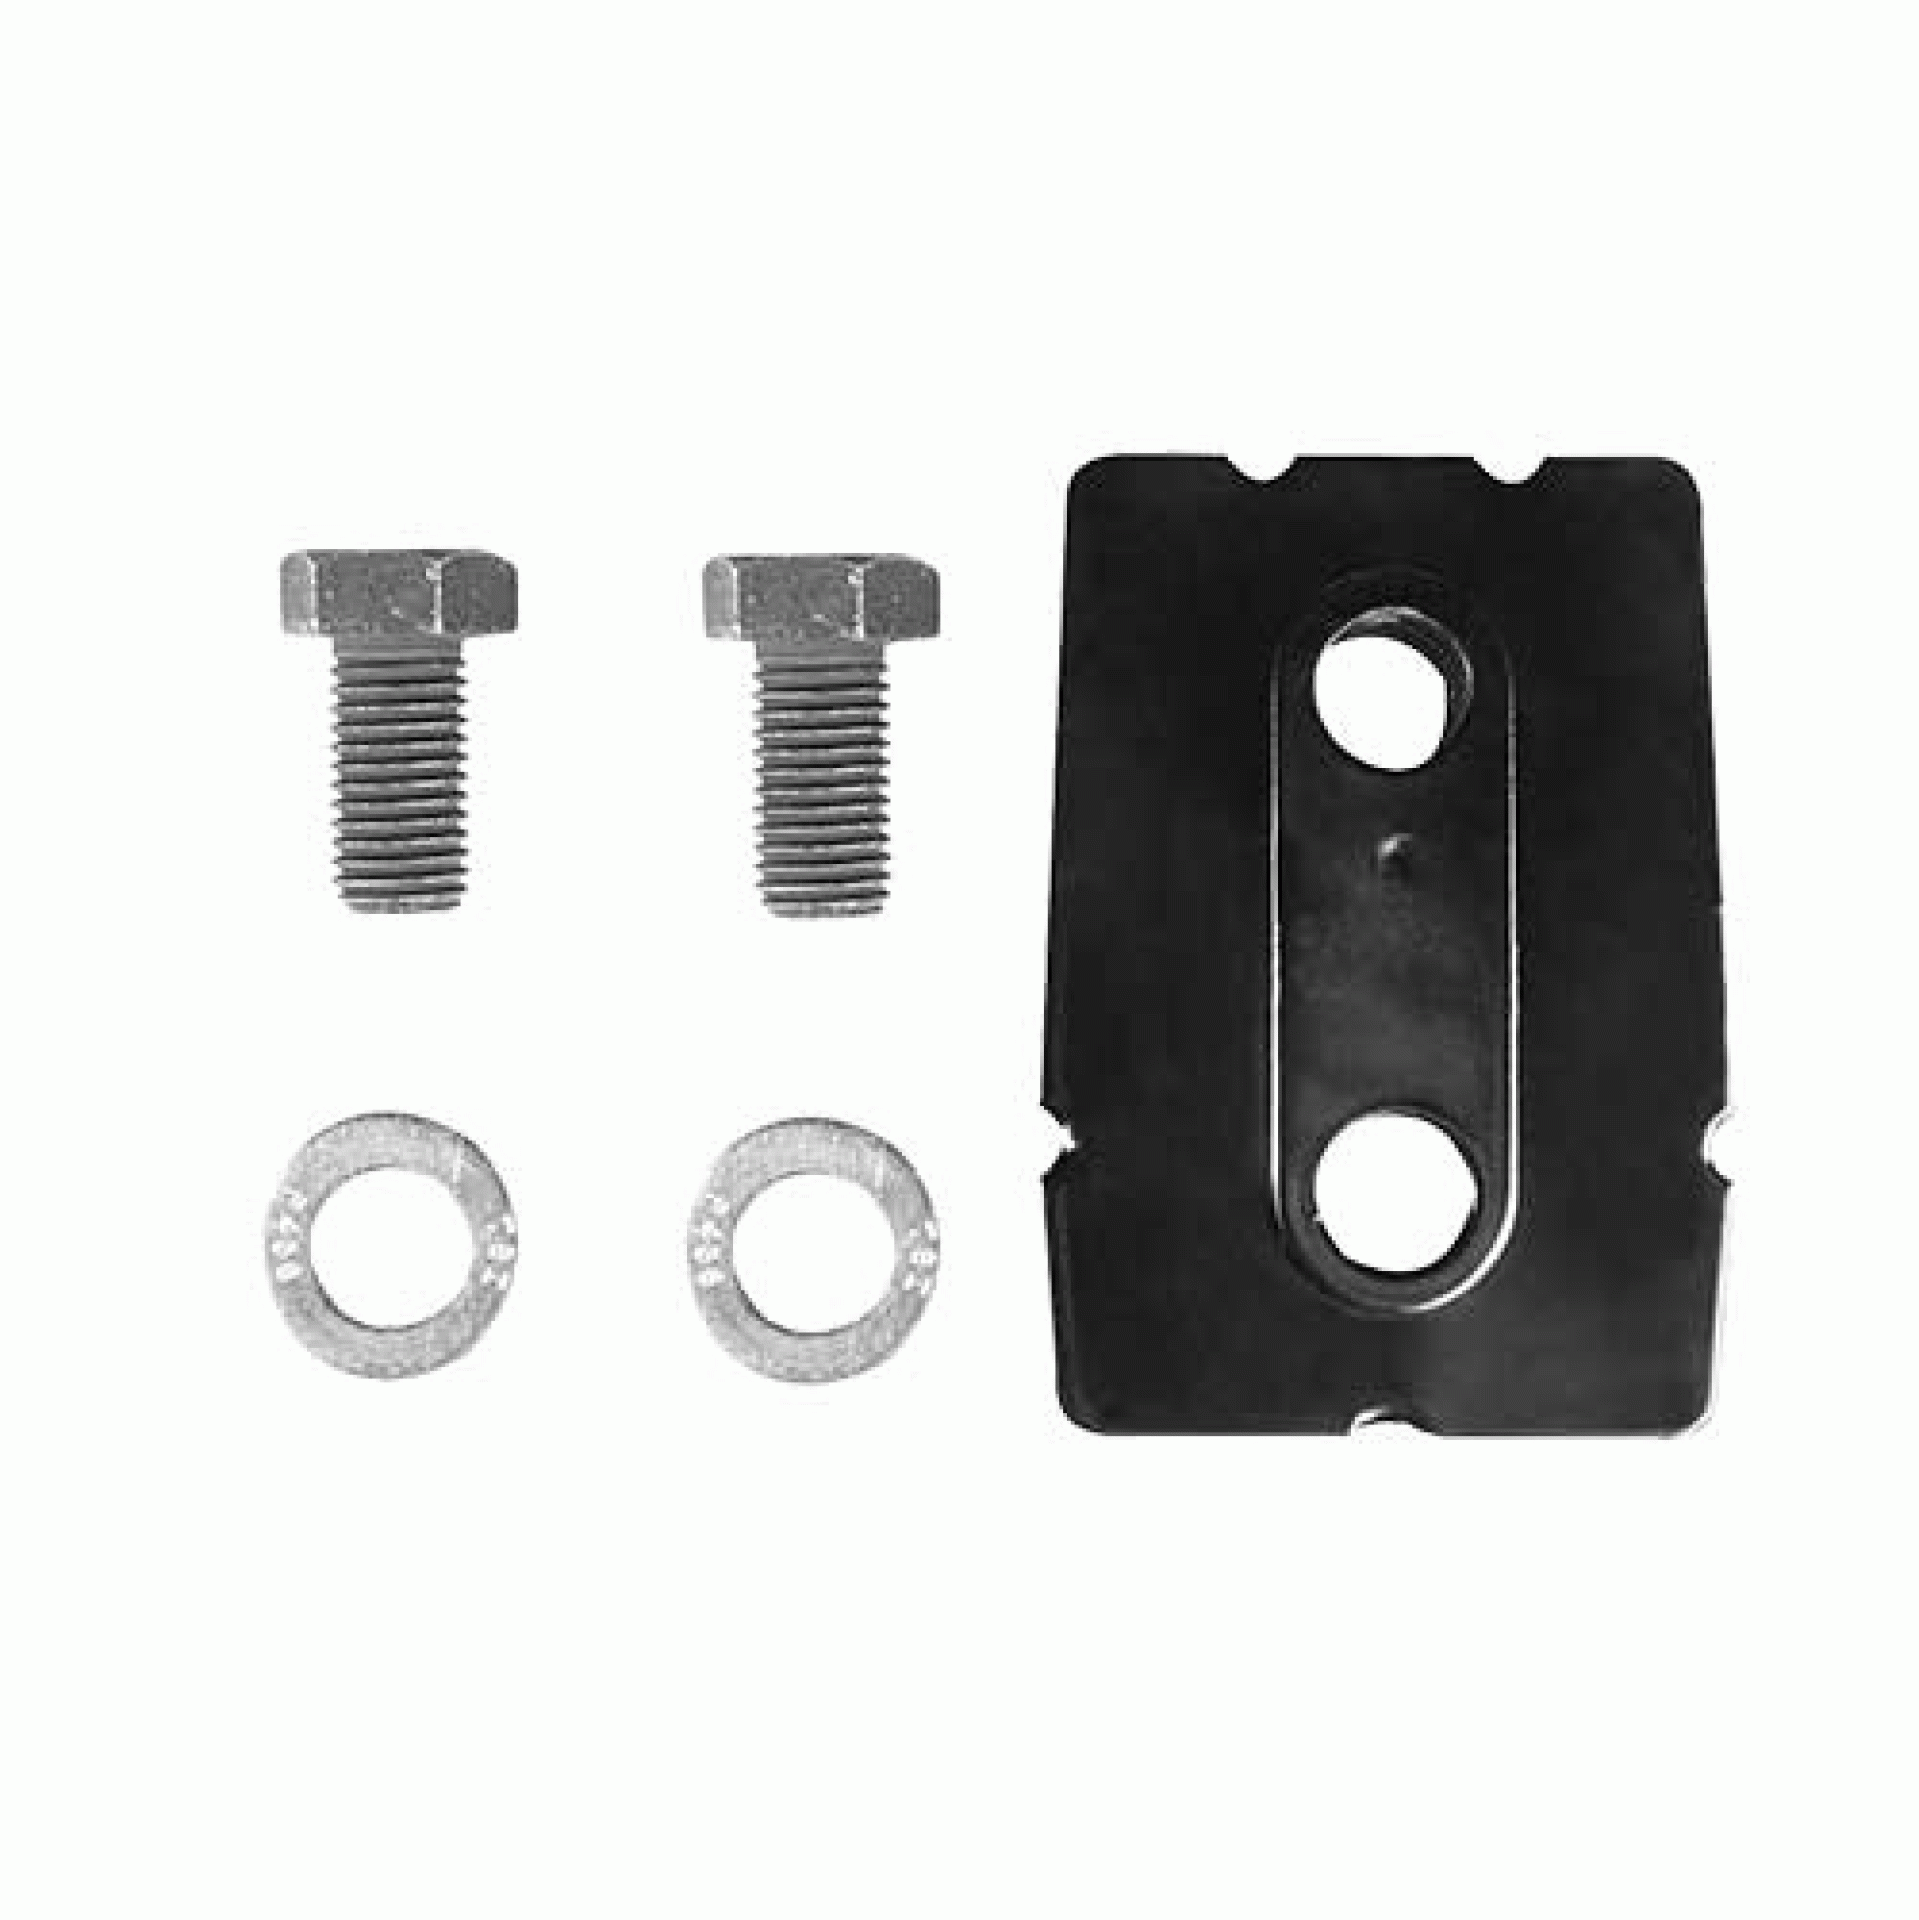 REESE | 68204 | Wedge Kit - Compatible with Select B&W Husky & Demco